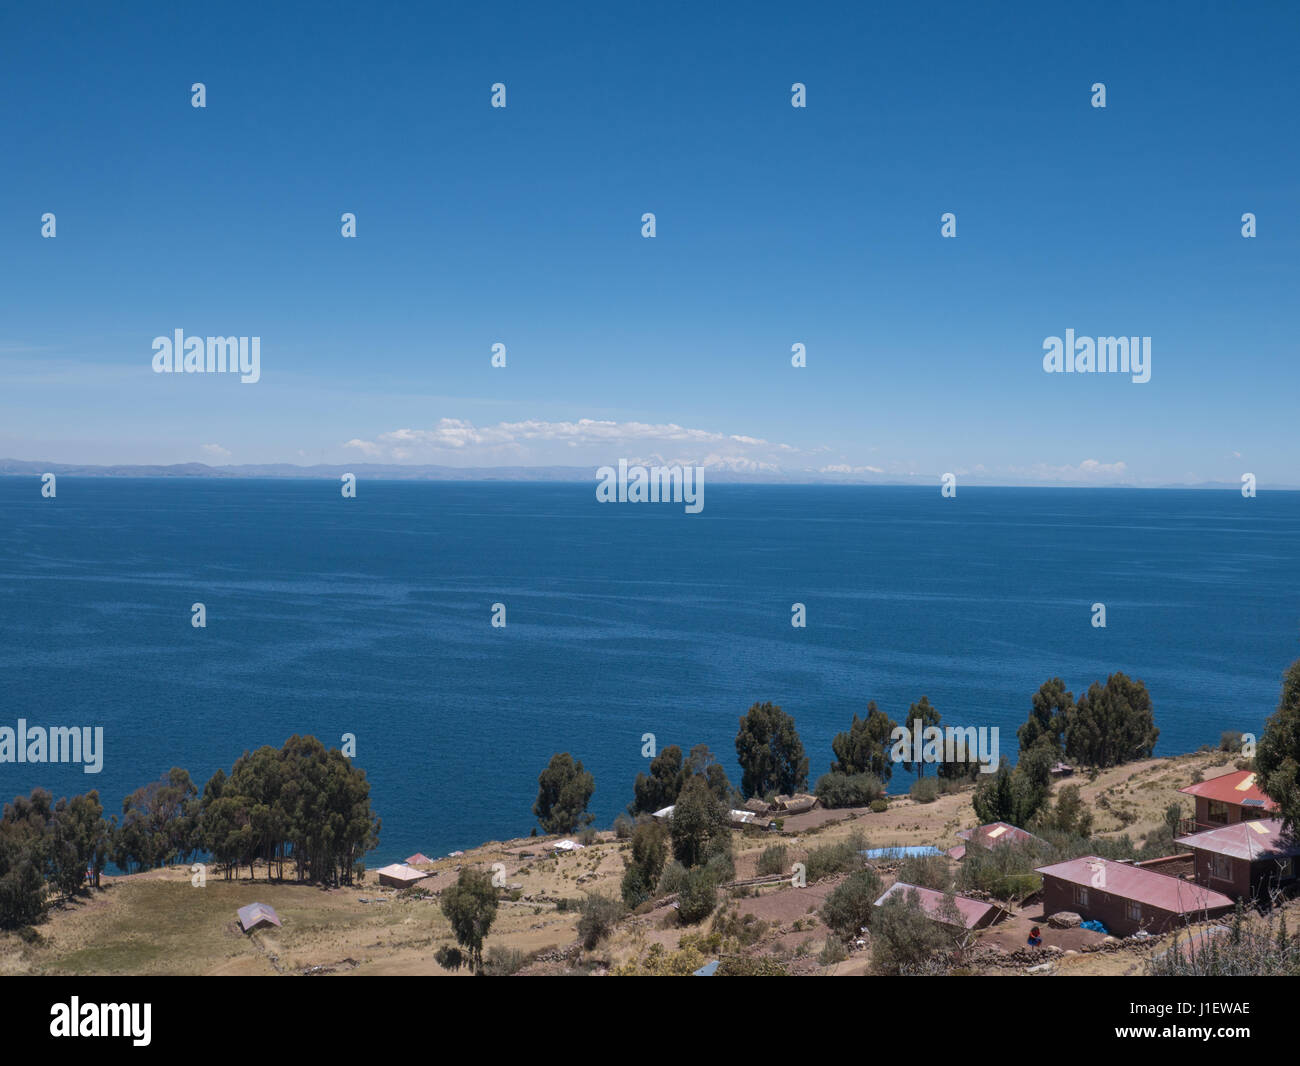 View of the mysterious Lake Titicaca from Taquile island, Puno Region, Peru Stock Photo